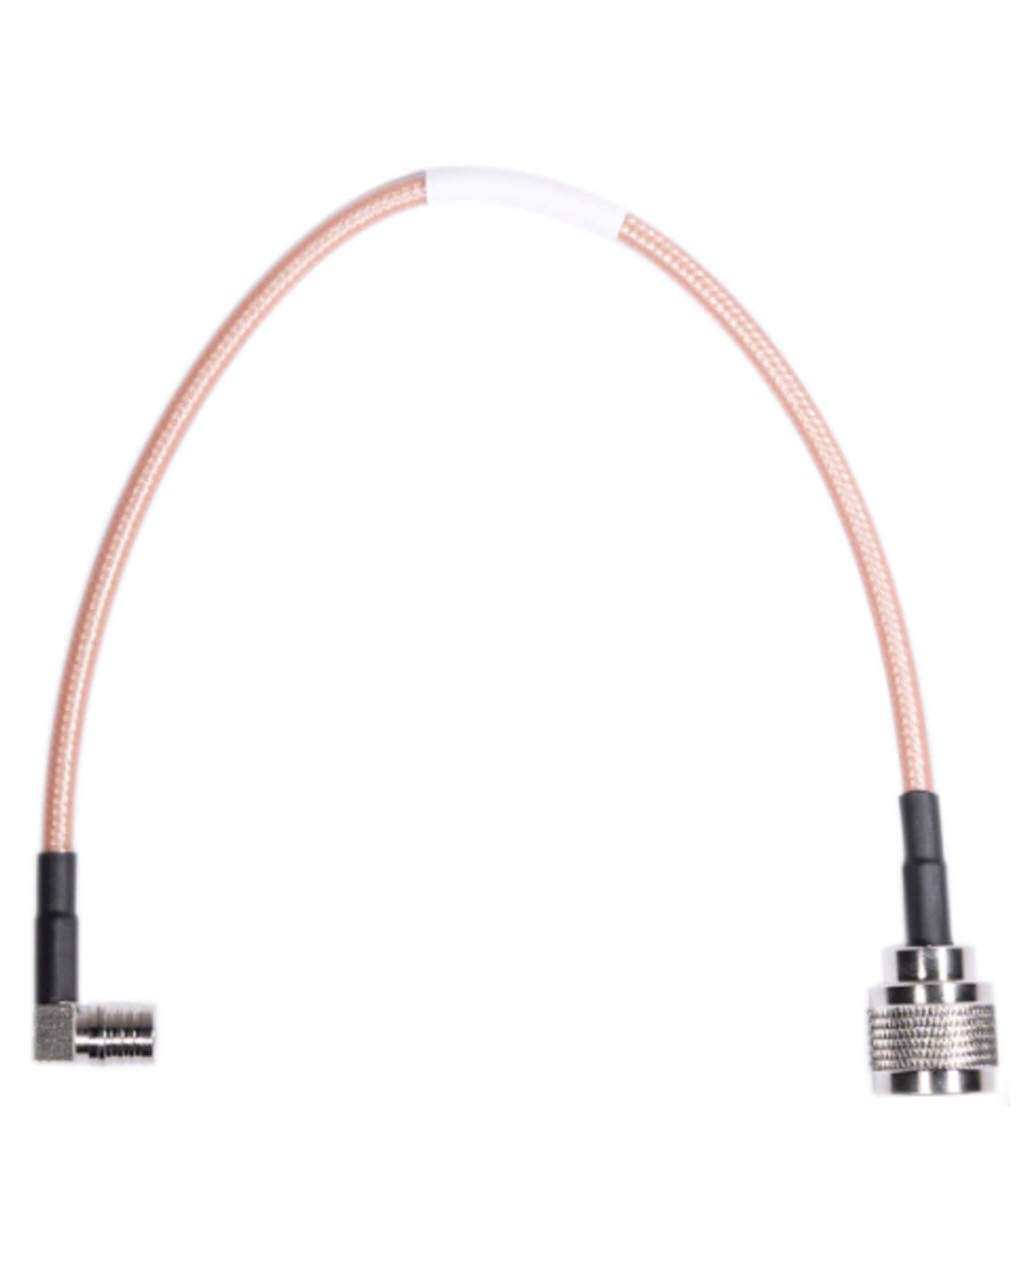 Coaxial RG Jumper Cable - N-Male to QMA Male Angle 1 ft